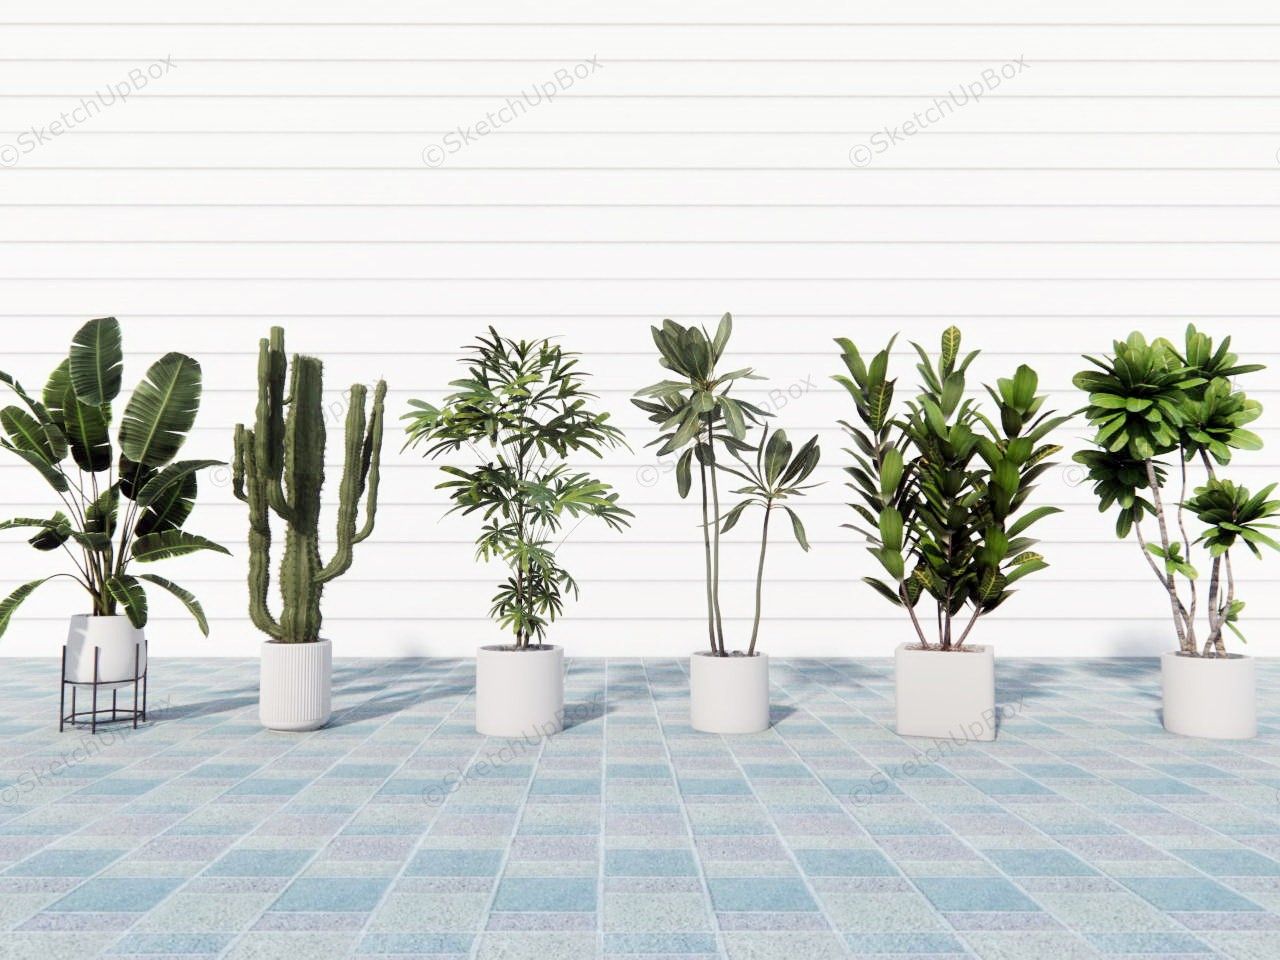 6 Large And Tall Houseplants sketchup model preview - SketchupBox